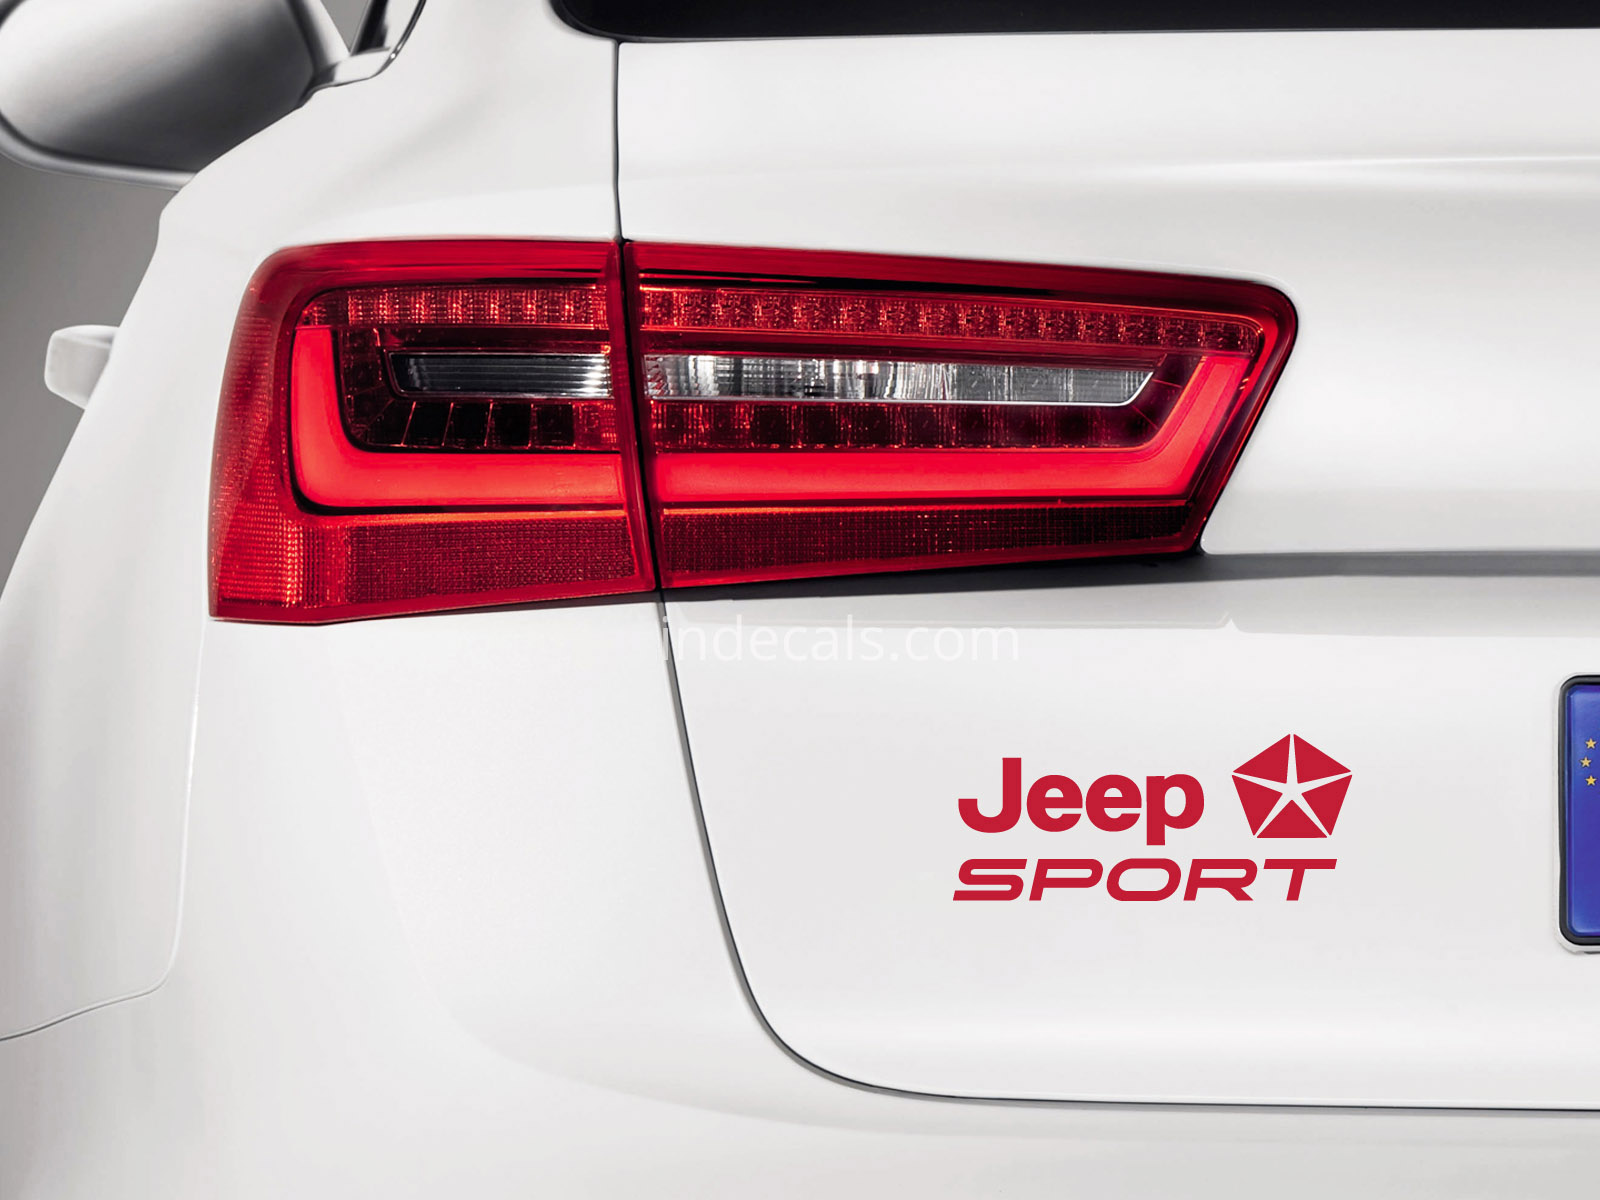 1 x Jeep Sports Sticker for Trunk - Red